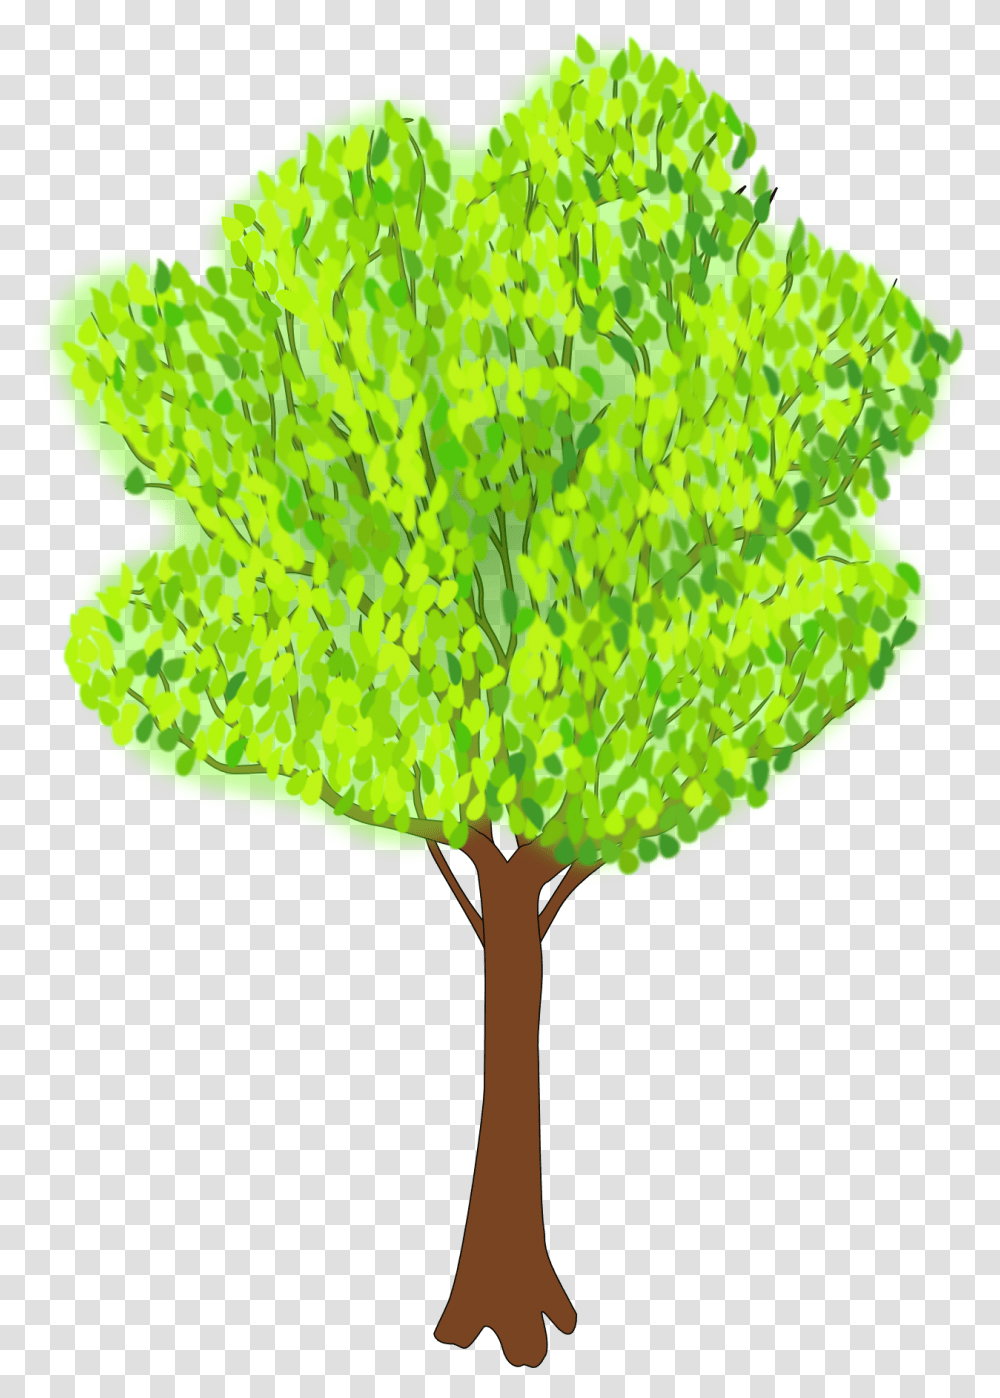 Tree With The Green Foliage In Summer Clipart Free Image Clipart Tree In Summer, Plant, Leaf, Fungus, Vegetation Transparent Png